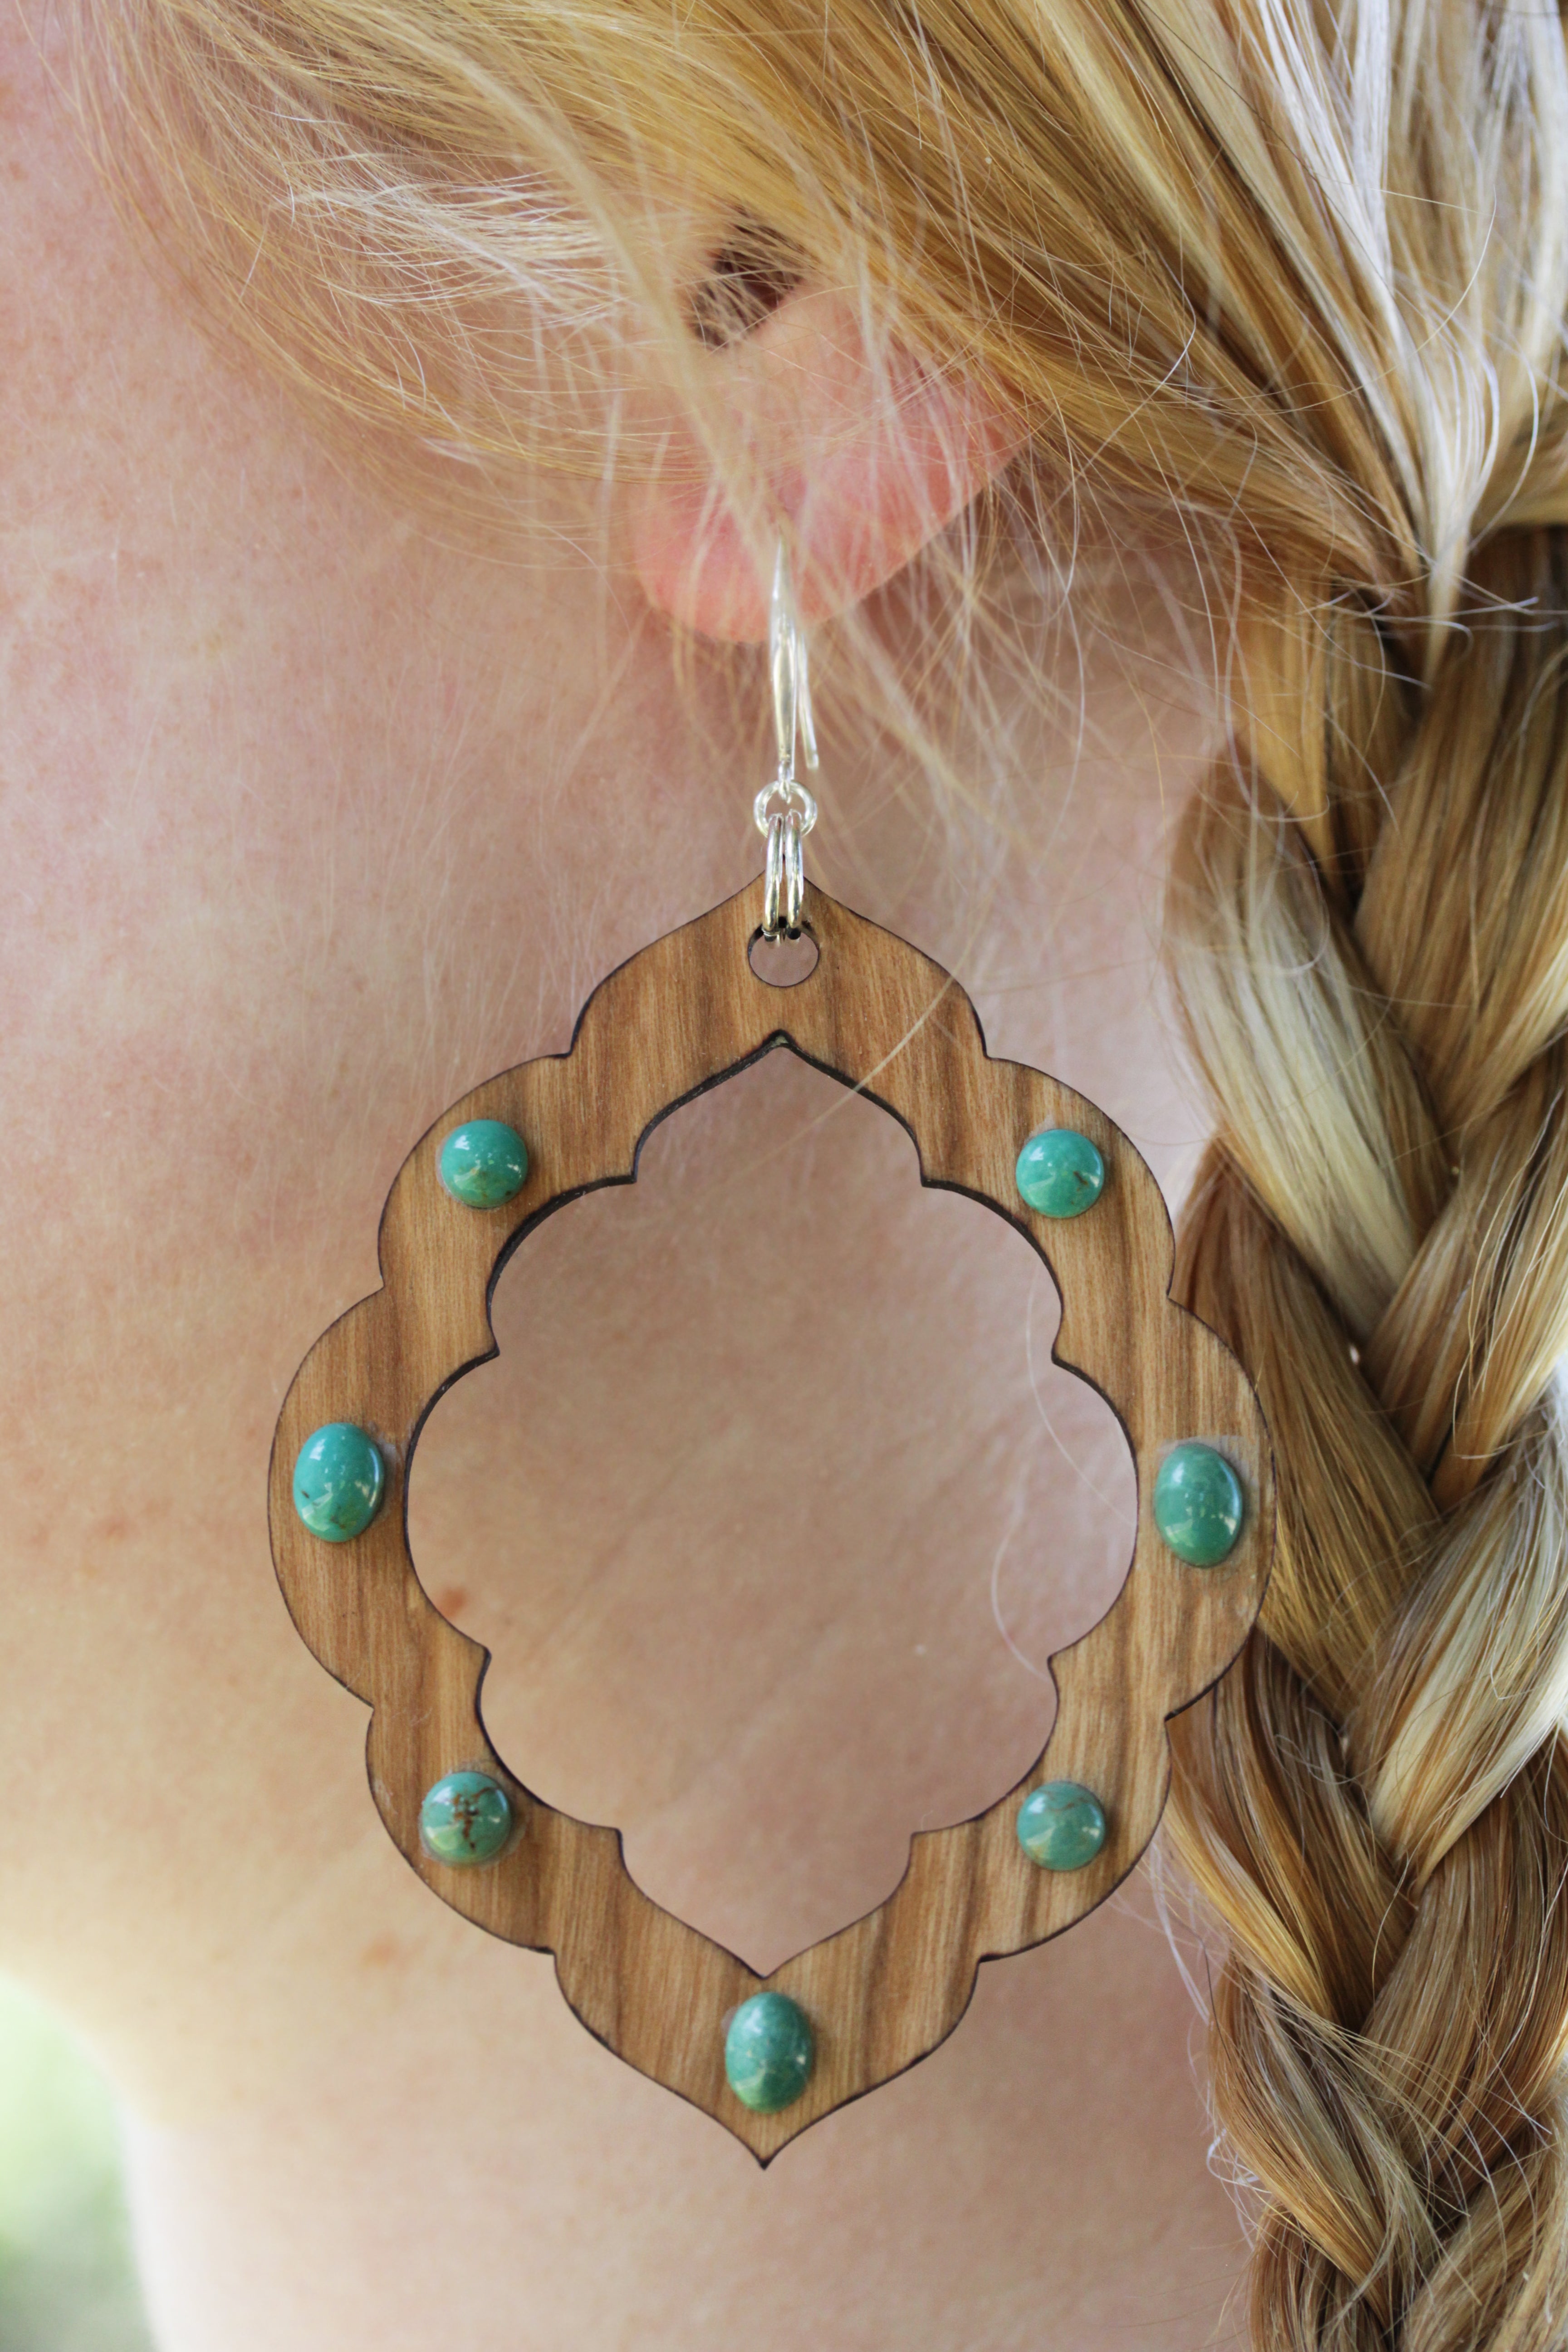 DIY Scallop Wood Frame with Natural Chinese Turquoise Cabochons Earrings - Goody Beads